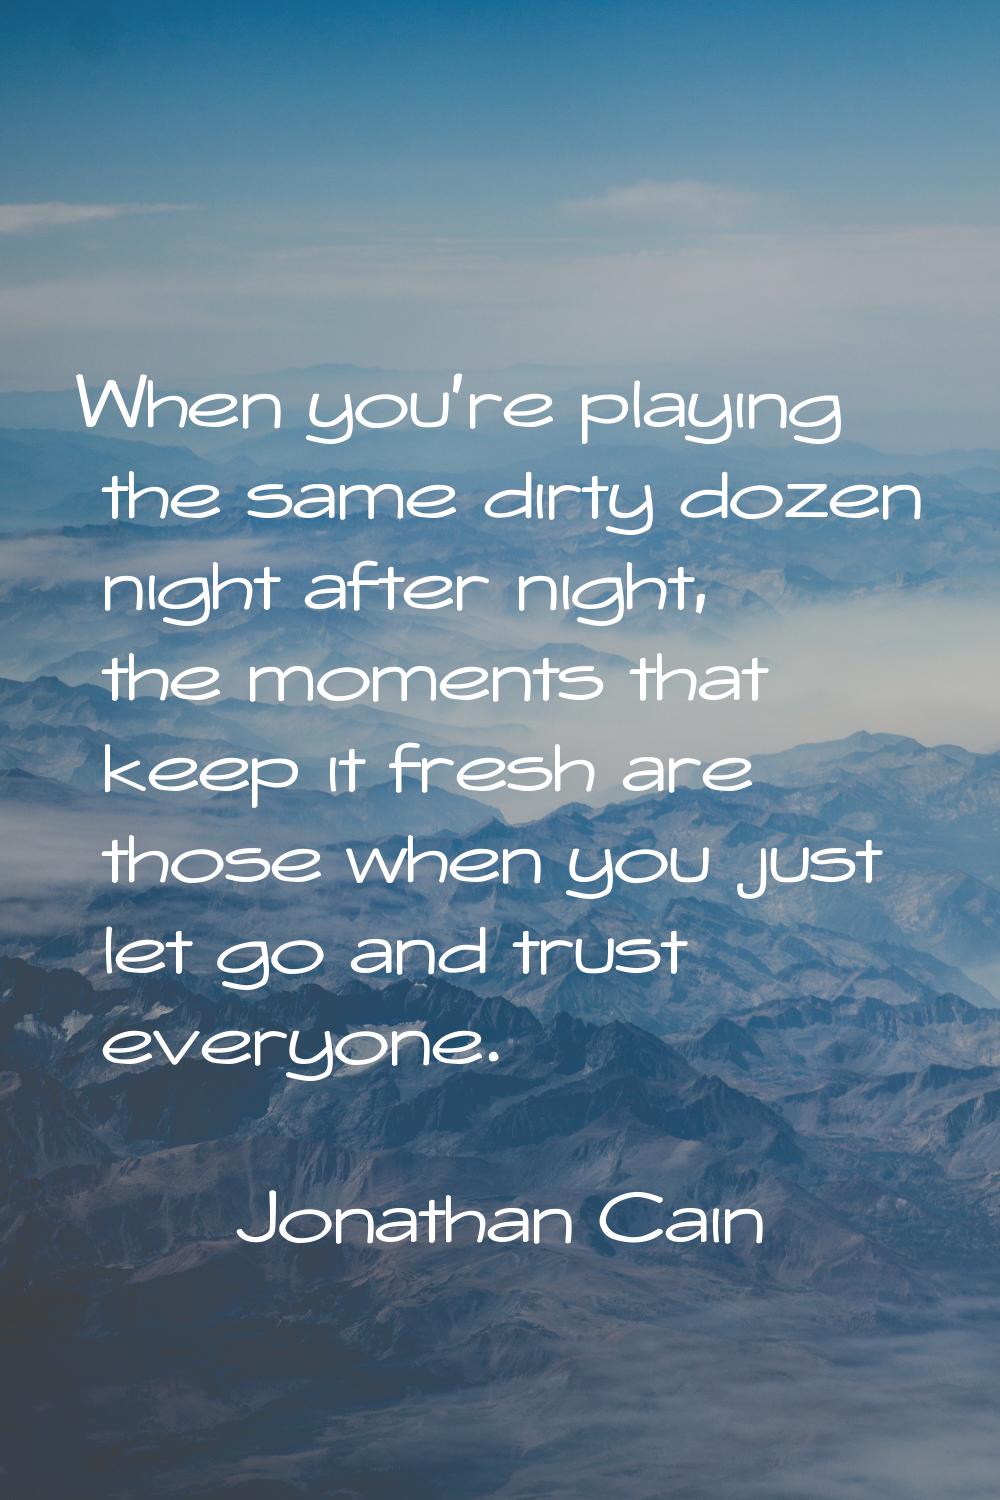 When you're playing the same dirty dozen night after night, the moments that keep it fresh are thos